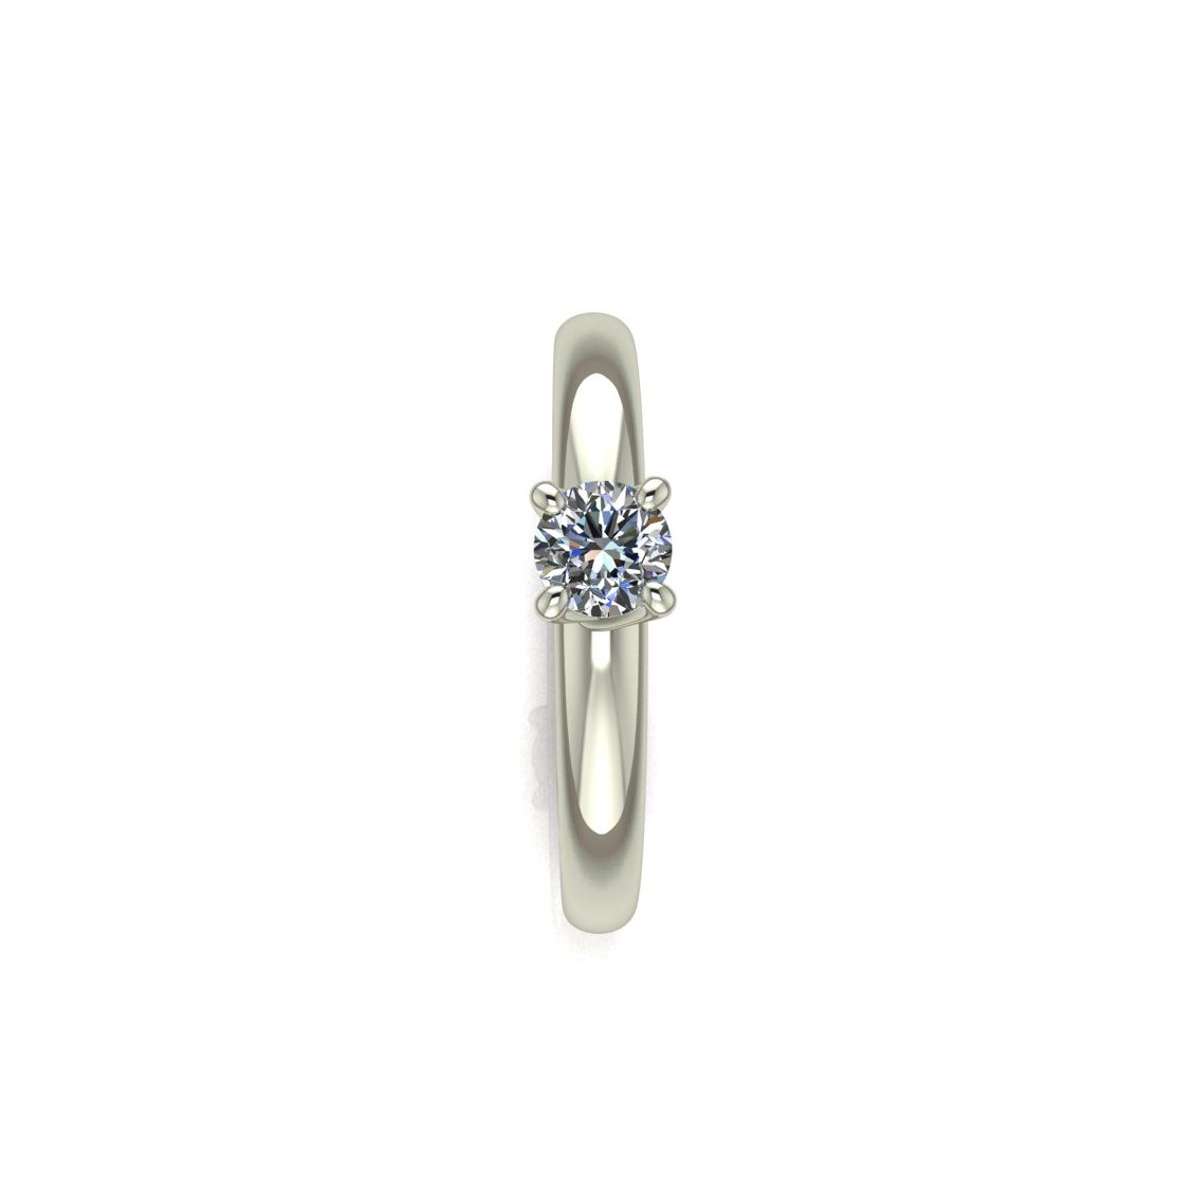 Women's solitaire ring at low prices made of white gold with a GIA carat certificate of 0.30 D-IF